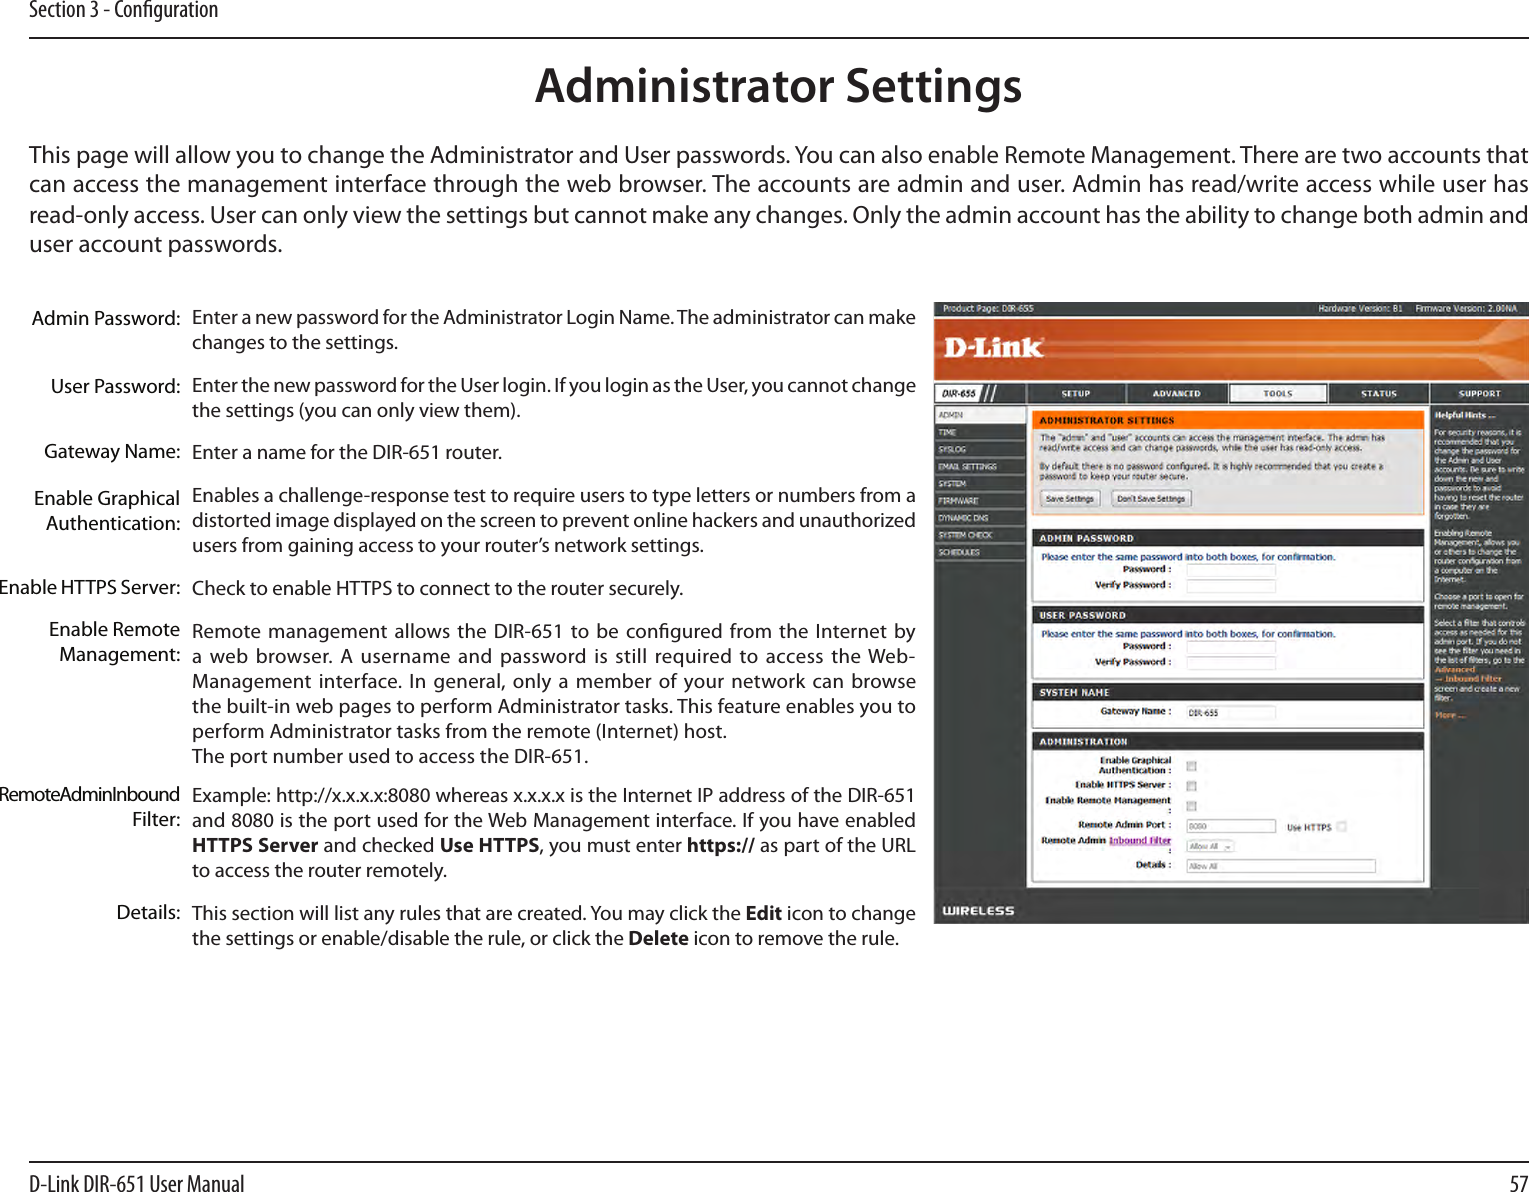 57D-Link DIR-651 User ManualSection 3 - CongurationAdministrator SettingsThis page will allow you to change the Administrator and User passwords. You can also enable Remote Management. There are two accounts that can access the management interface through the web browser. The accounts are admin and user. Admin has read/write access while user has read-only access. User can only view the settings but cannot make any changes. Only the admin account has the ability to change both admin and user account passwords.Enter a new password for the Administrator Login Name. The administrator can make changes to the settings.Enter the new password for the User login. If you login as the User, you cannot change the settings (you can only view them).Enter a name for the DIR-651 router.Enables a challenge-response test to require users to type letters or numbers from a distorted image displayed on the screen to prevent online hackers and unauthorized users from gaining access to your router’s network settings.Check to enable HTTPS to connect to the router securely.Remote management  allows the  DIR-651 to be  congured from the  Internet  by a web browser. A username  and  password is still required to  access the Web-Management interface. In general, only  a  member of your network can browse the built-in web pages to perform Administrator tasks. This feature enables you to perform Administrator tasks from the remote (Internet) host.The port number used to access the DIR-651.Example: http://x.x.x.x:8080 whereas x.x.x.x is the Internet IP address of the DIR-651 and 8080 is the port used for the Web Management interface. If you have enabled HTTPS Server and checked Use HTTPS, you must enter https:// as part of the URL to access the router remotely.This section will list any rules that are created. You may click the Edit icon to change the settings or enable/disable the rule, or click the Delete icon to remove the rule.Admin Password:User Password:Gateway Name:Enable Graphical Authentication:Enable HTTPS Server:Enable Remote Management:Remote Admin Inbound Filter:Details: